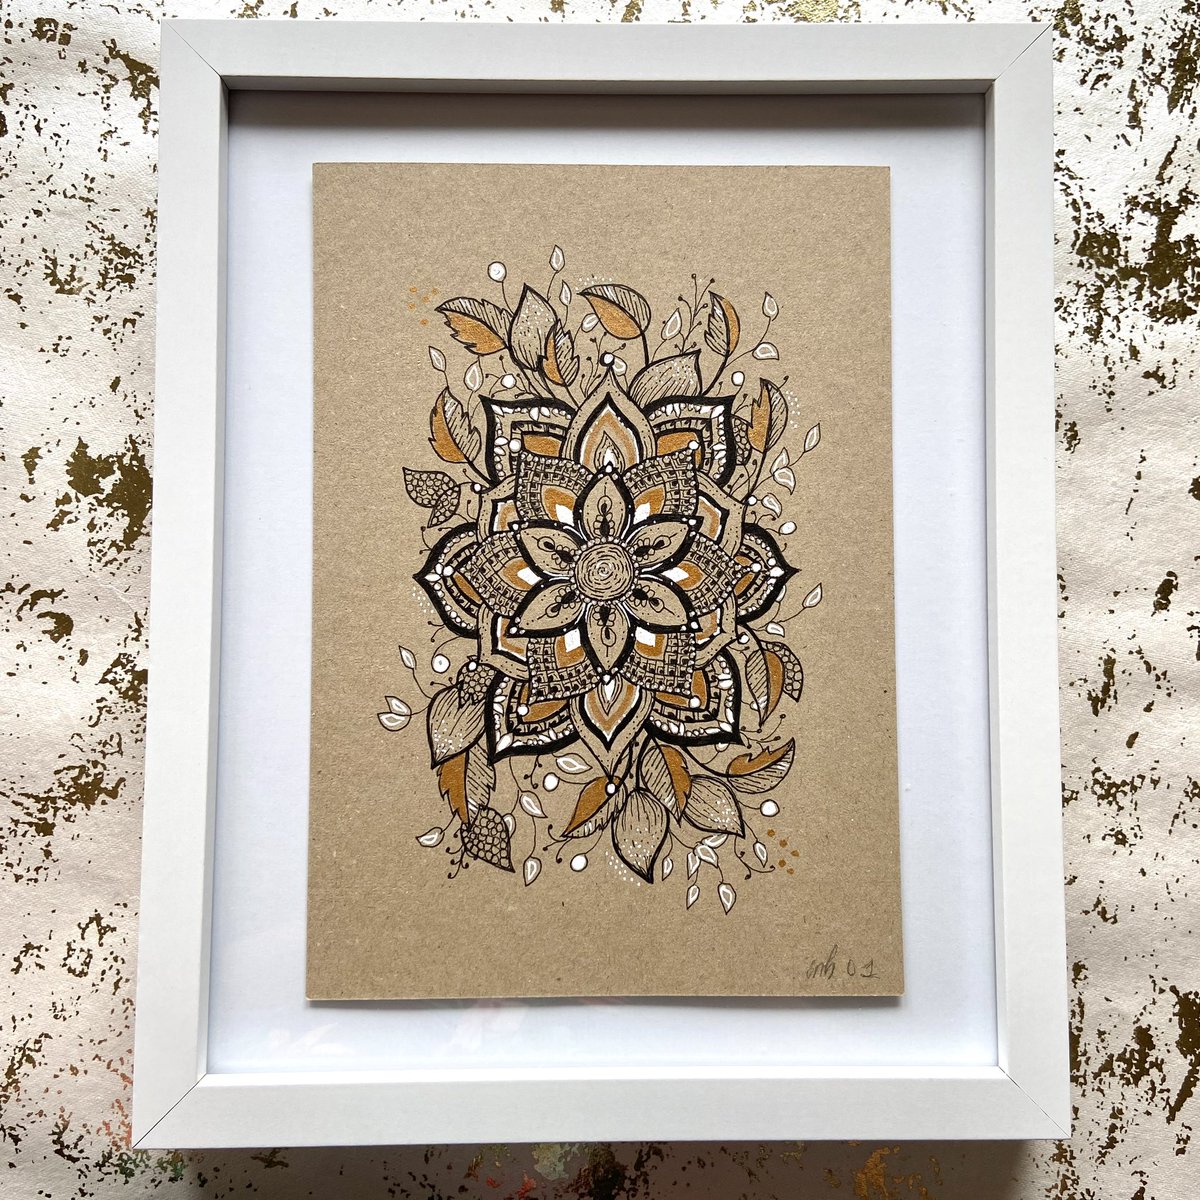 A5 original ink drawings
etsy.me/2TCi9qM #ukgiftam #ukgifthour #supportsmall  #shopindie